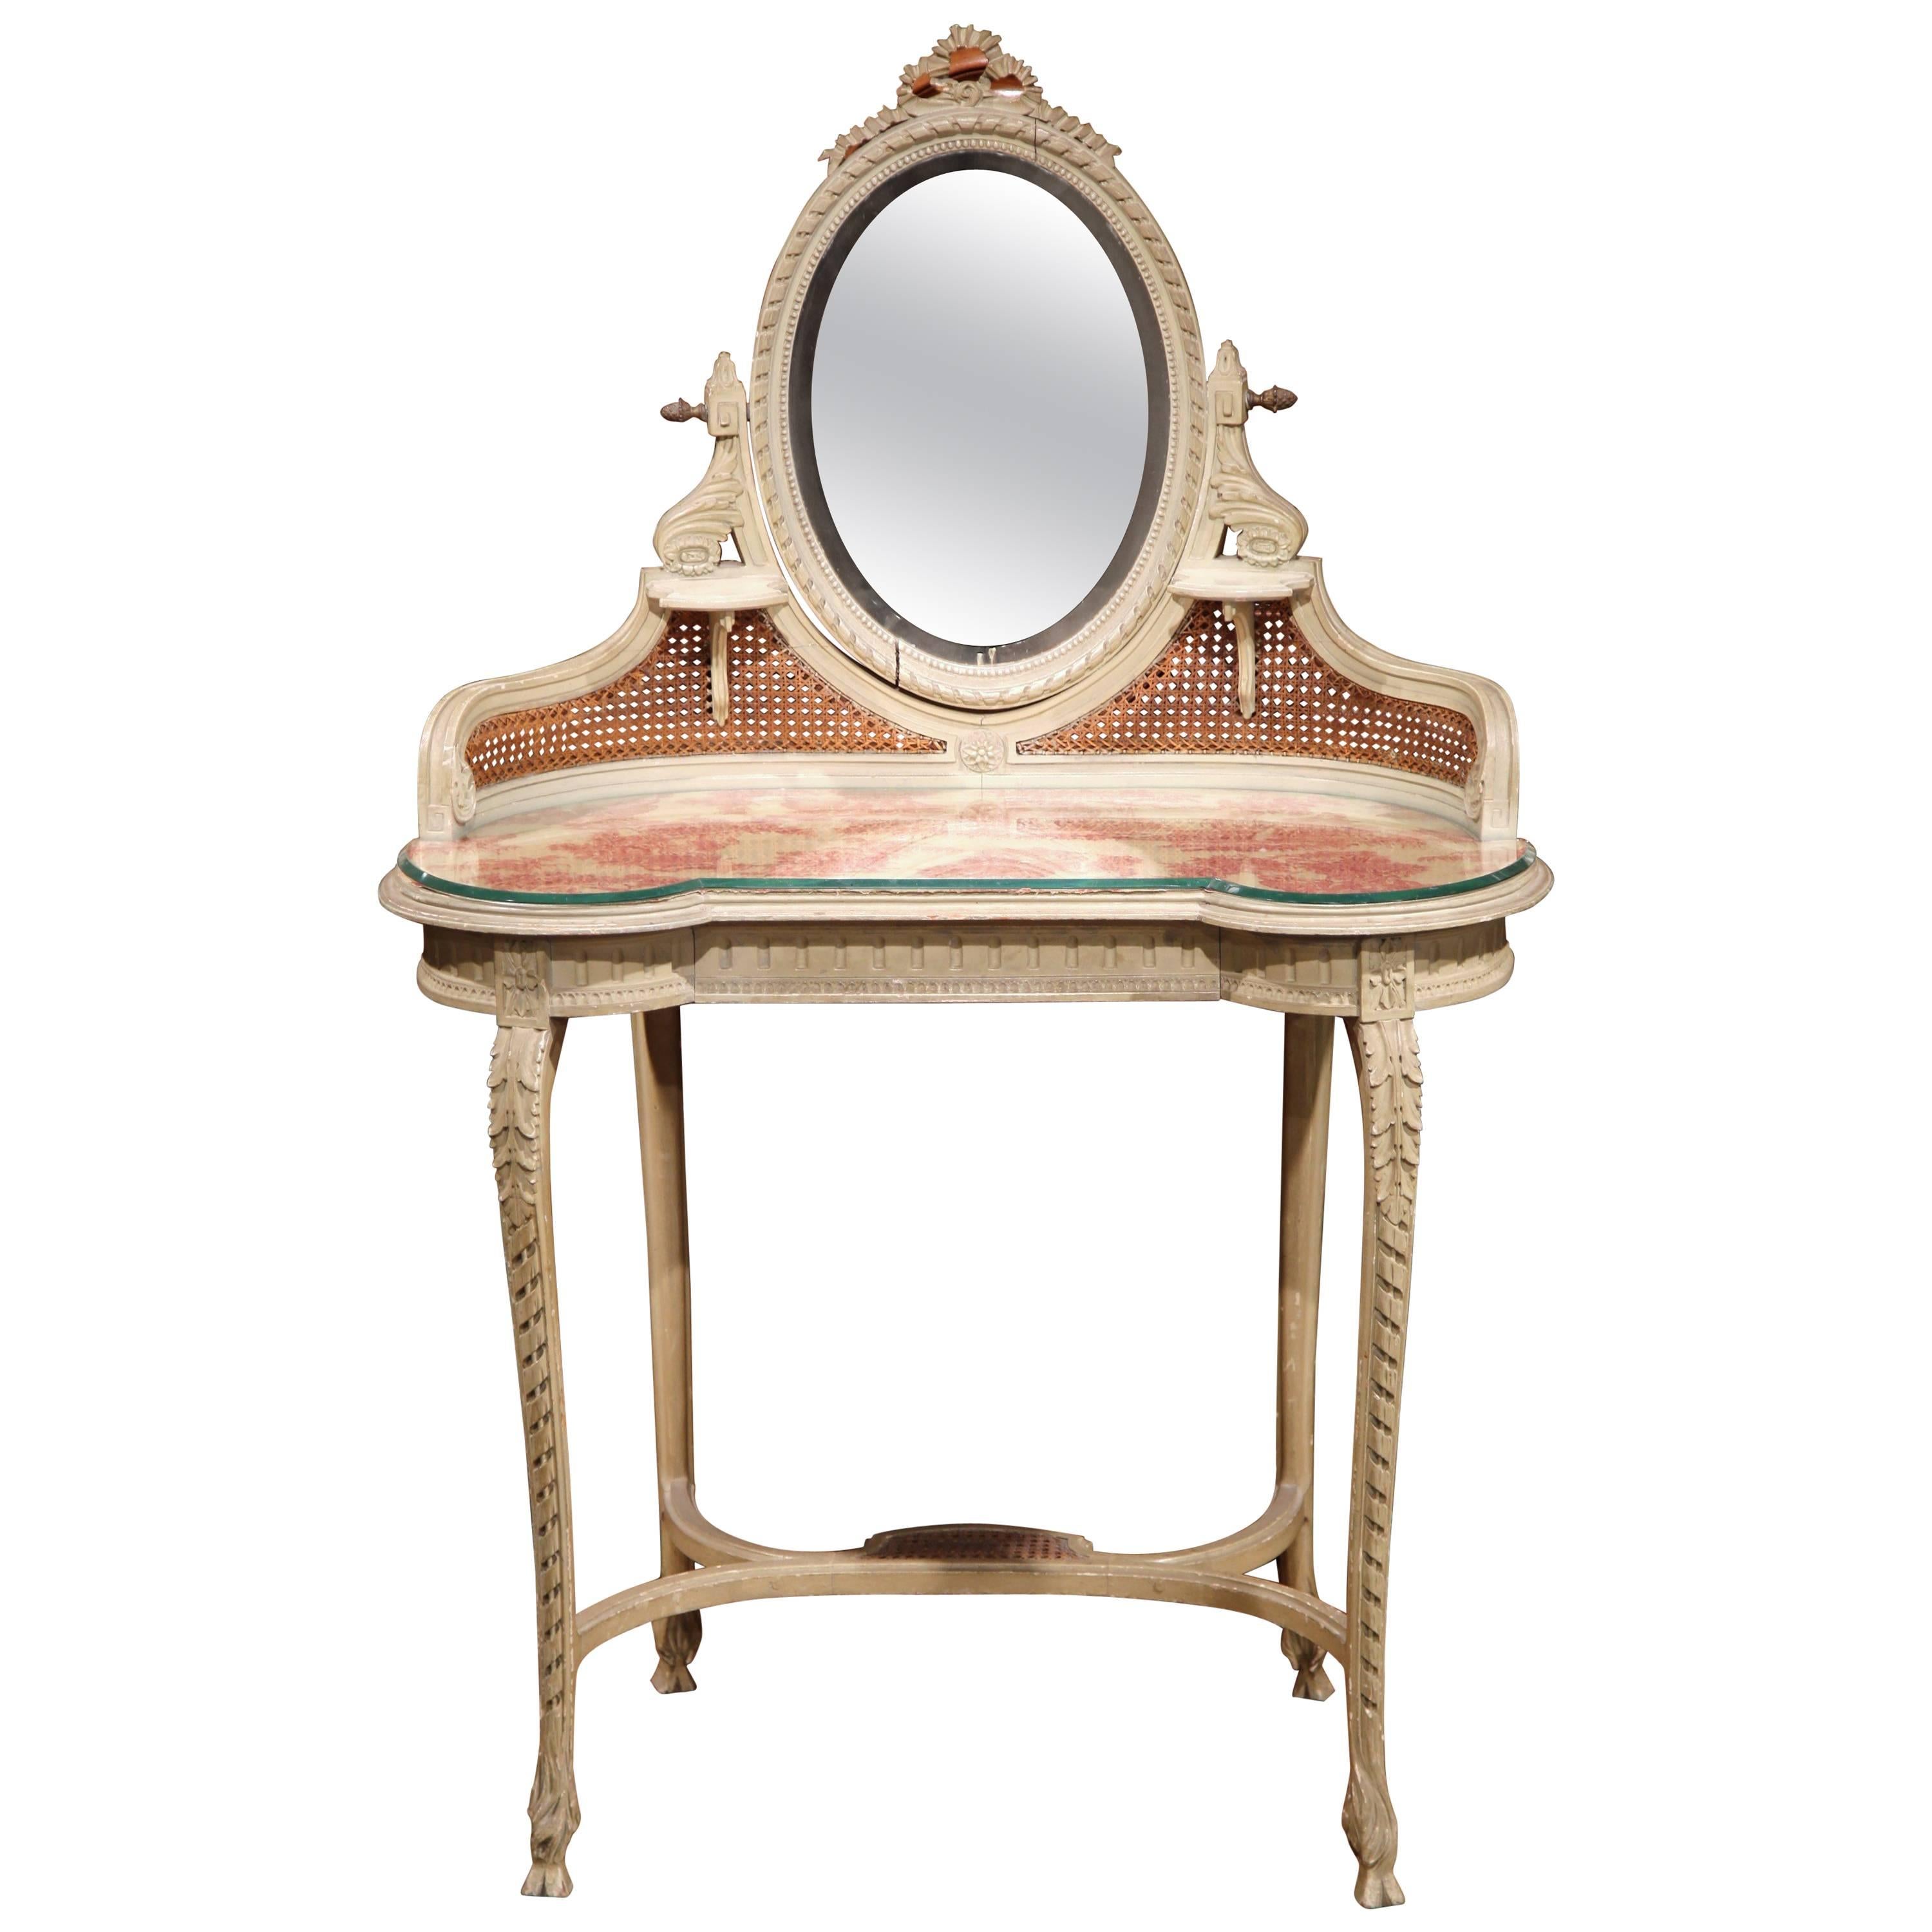 19th Century French Louis XVI Carved and Painted Vanity Coiffeuse with Cane